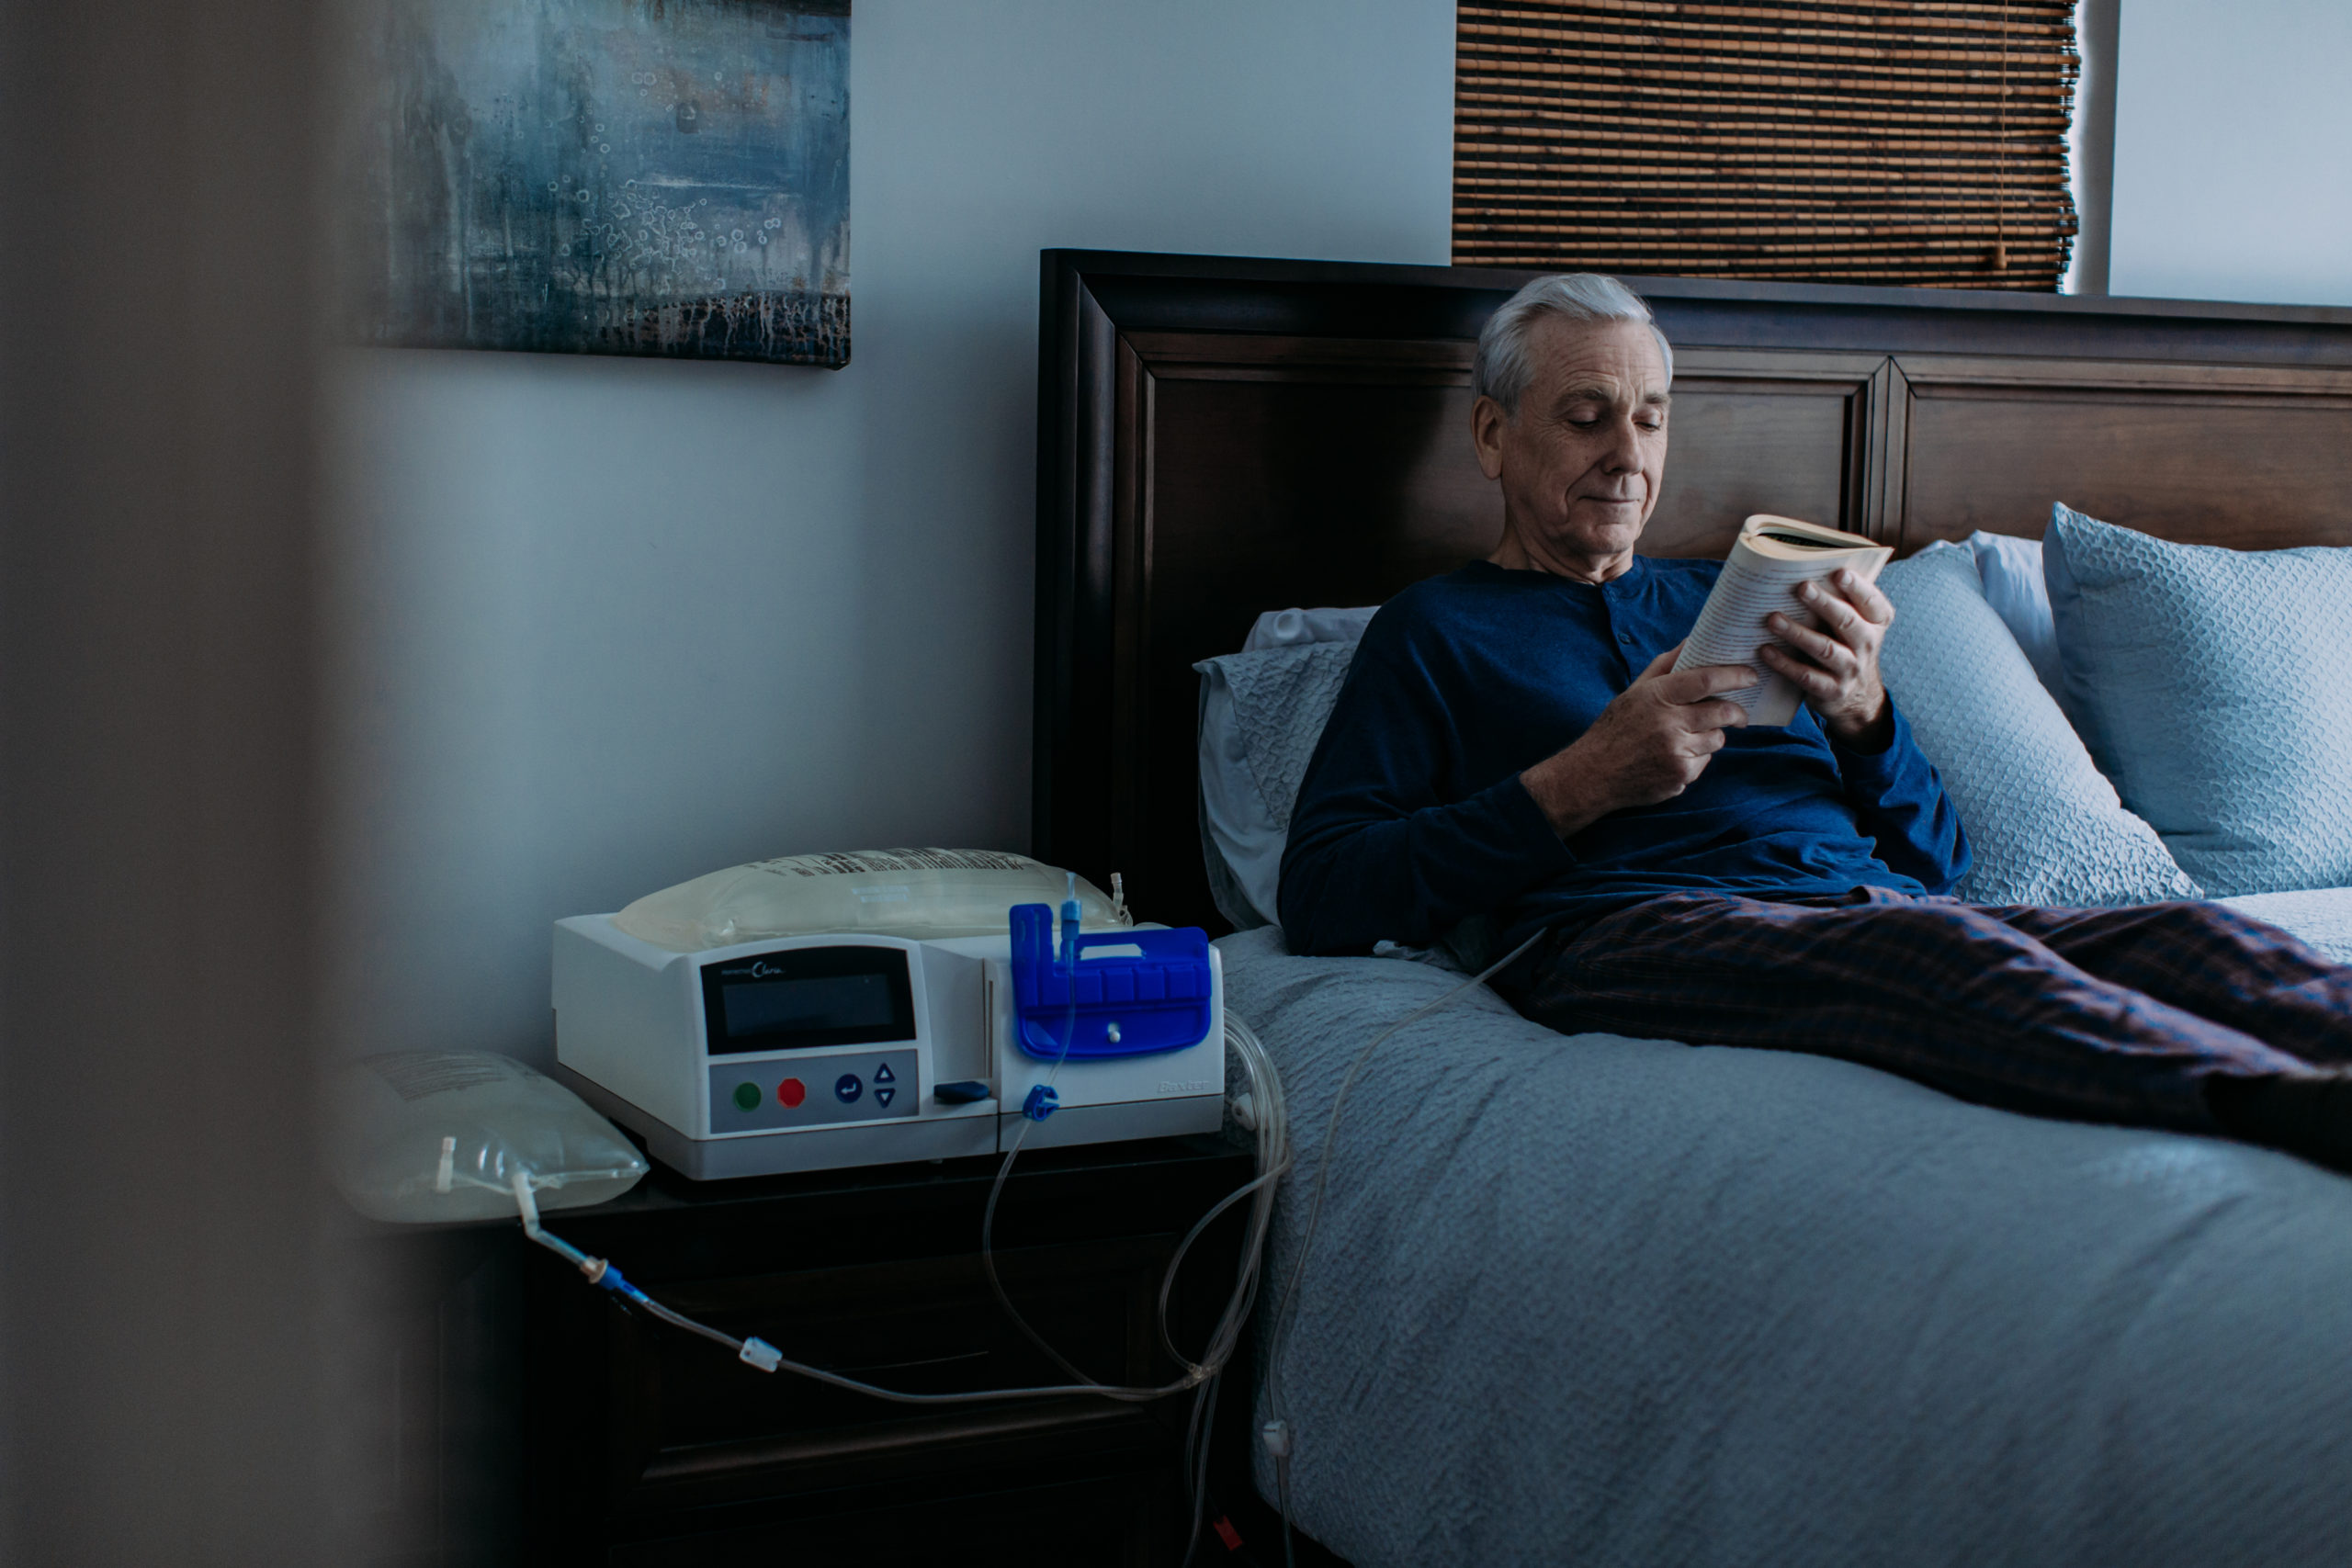 Home dialysis is changing lives: “You can do your therapy at night, and then go about your day”